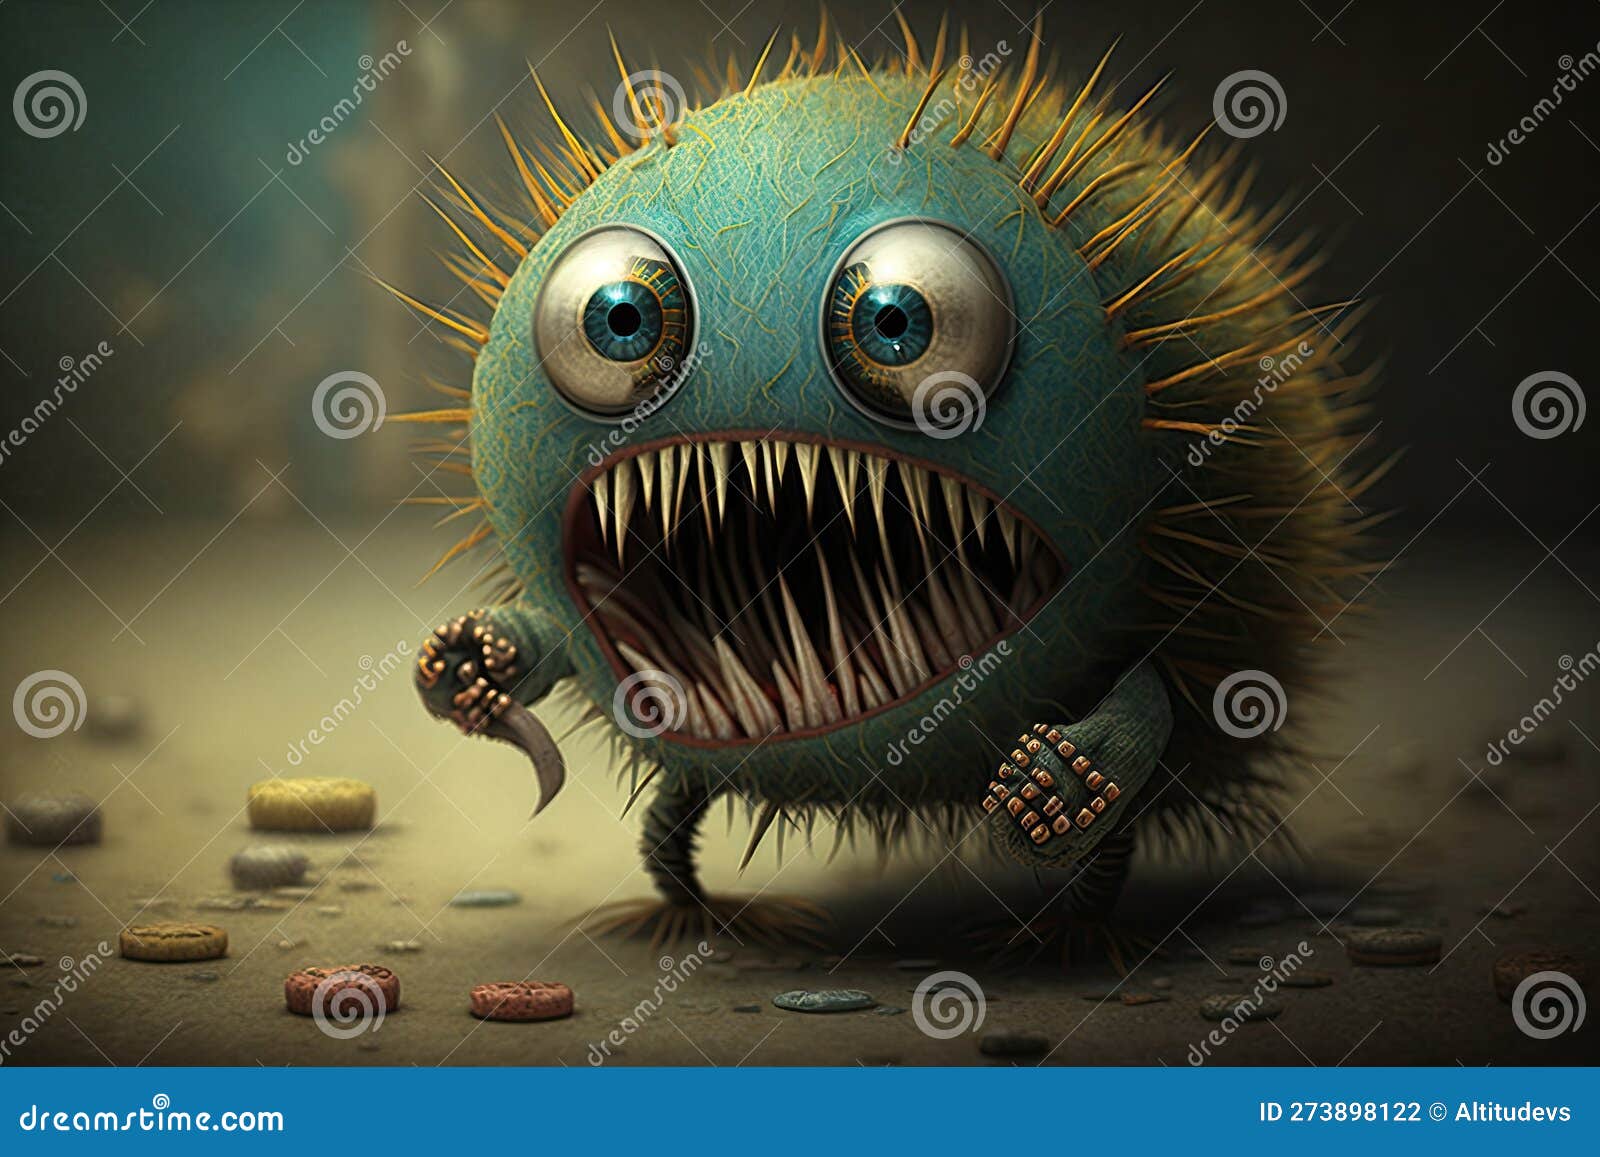 Door with Black Angry Scary Monster Face. Stock Image - Image of